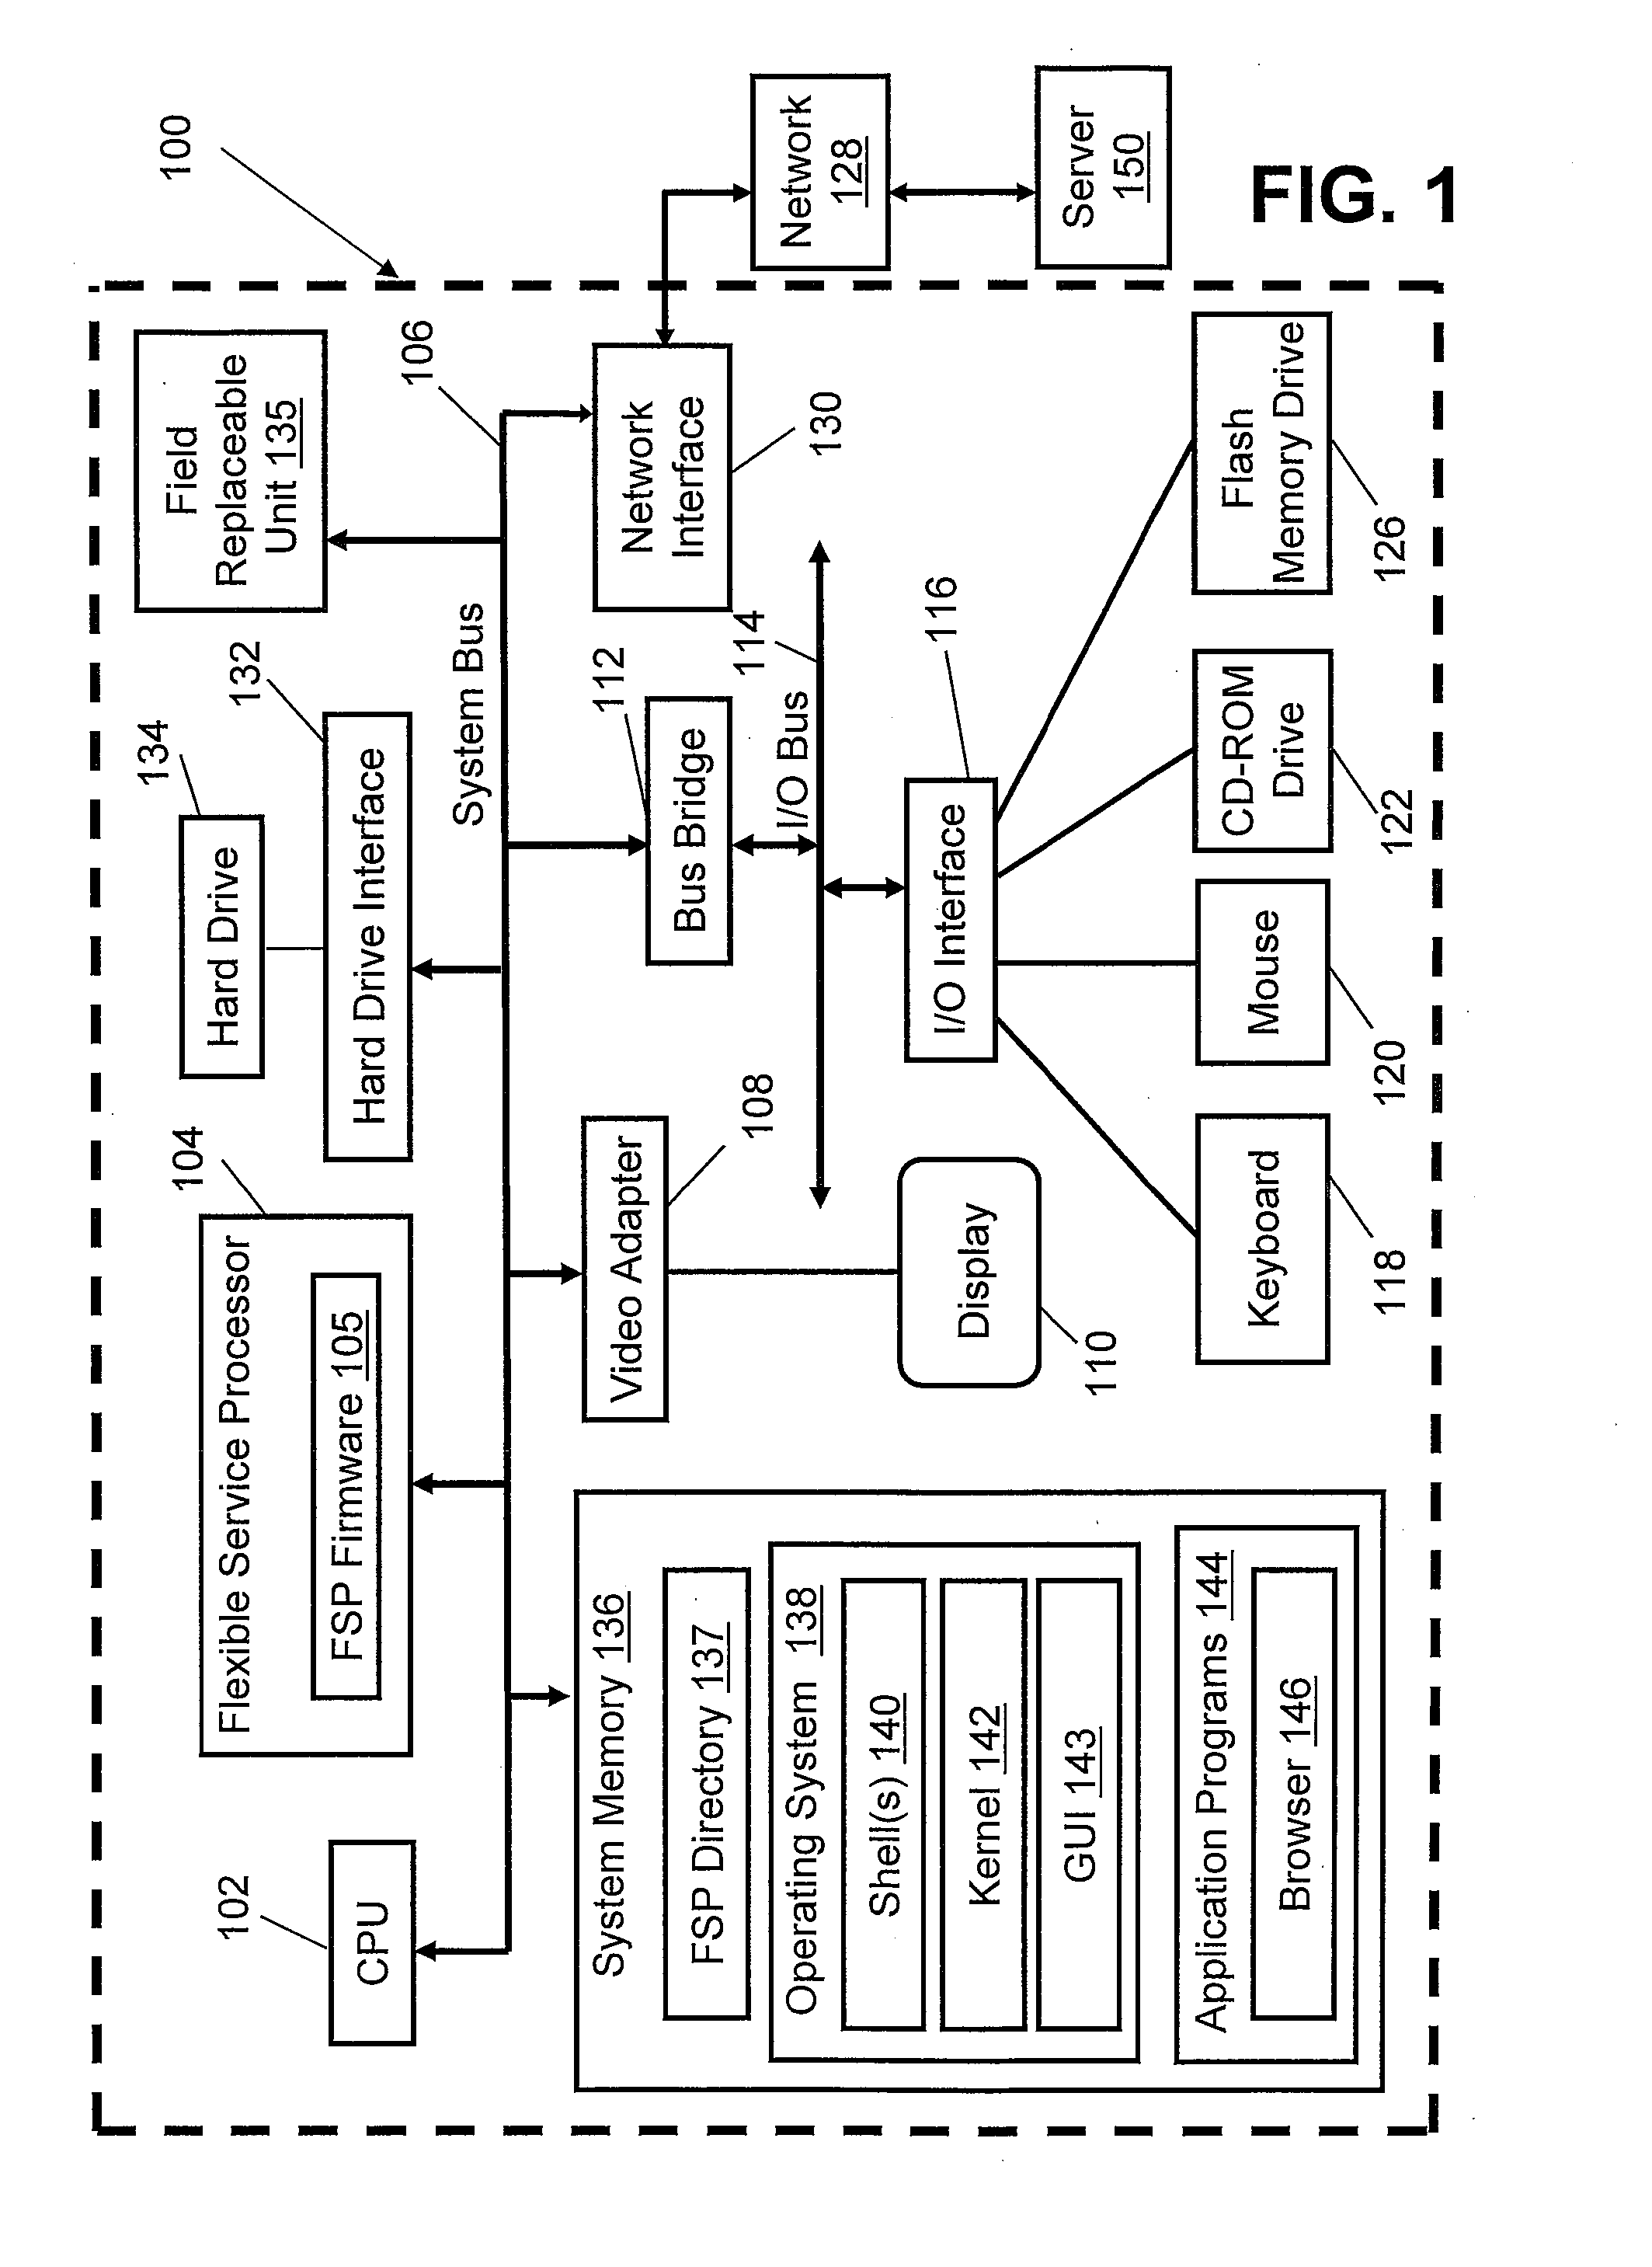 Method and system for virtual removal of physical field replaceable units